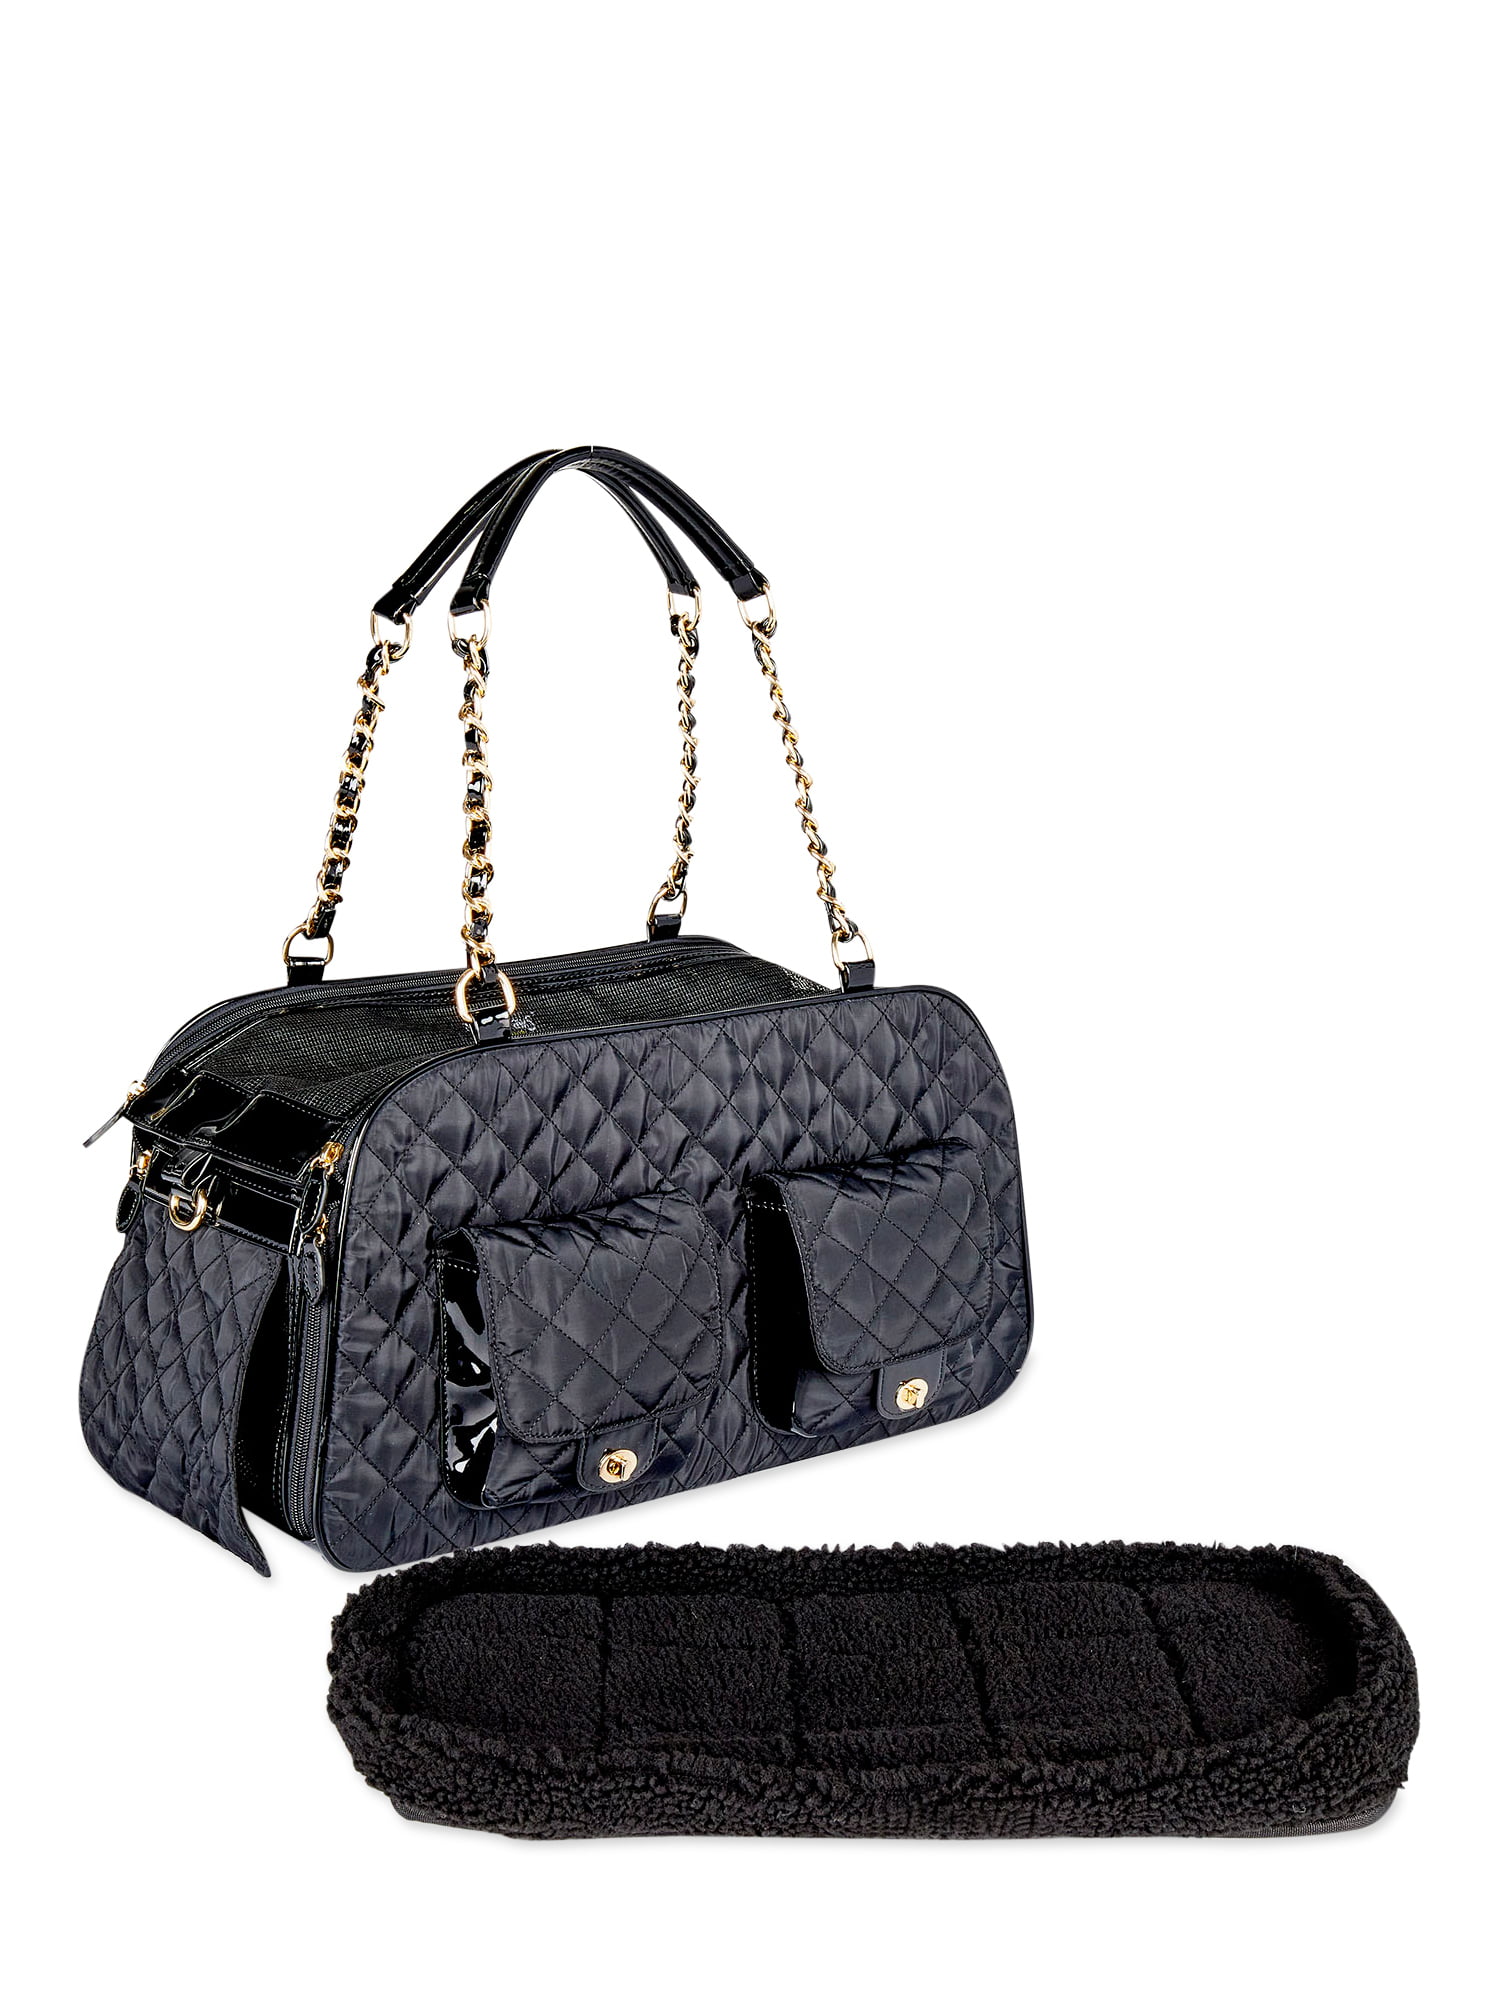 CANINI by Baguette Airline Approved Luxuious and Eco-Friendly